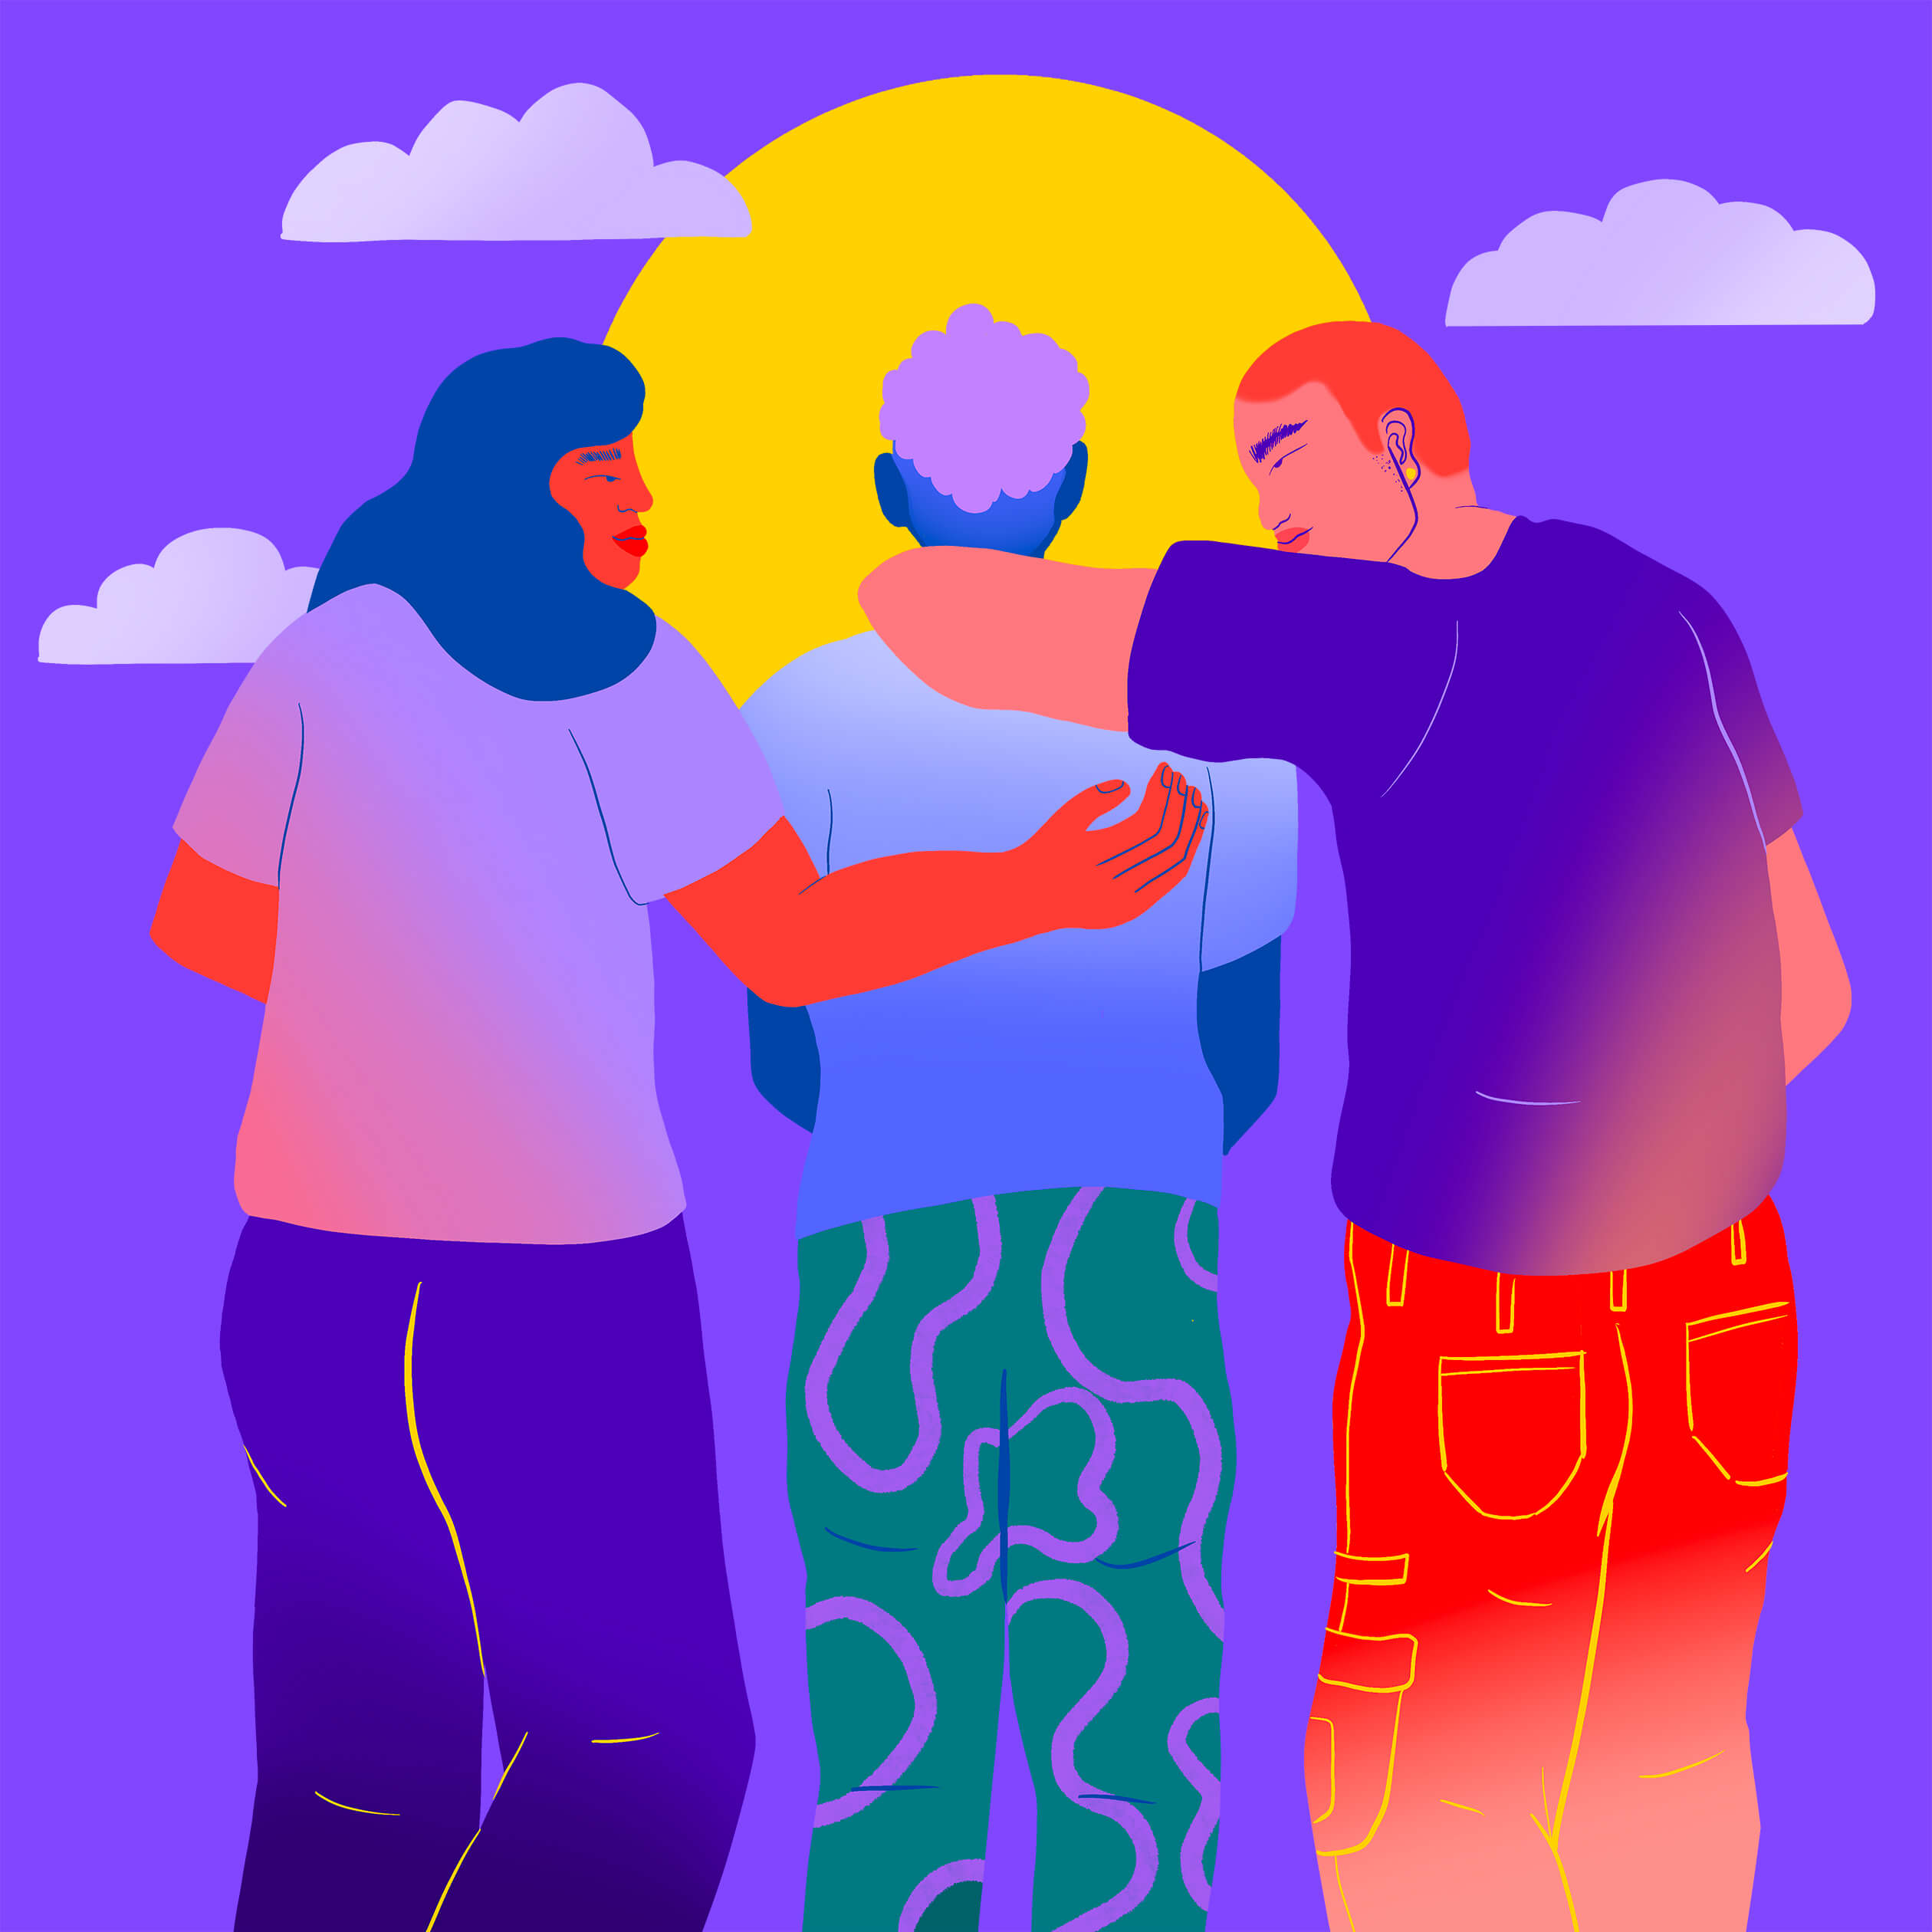 3 LGBTQ youth embracing facing the sky with sun and clouds